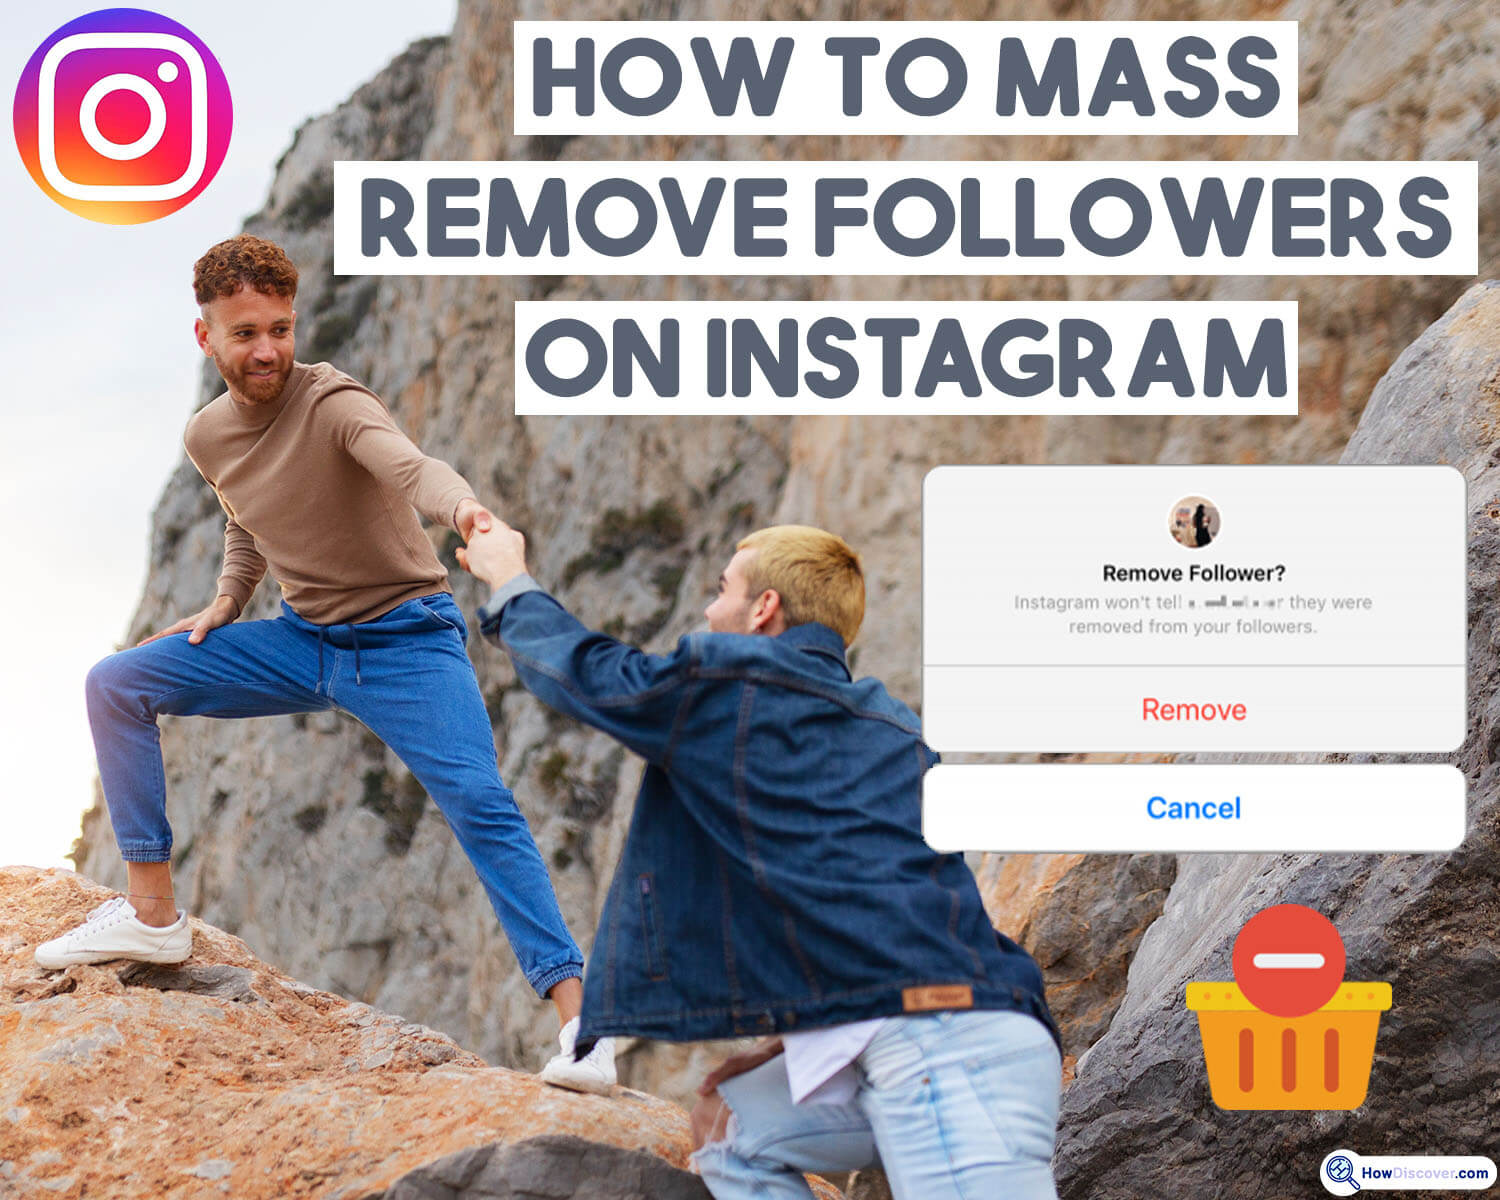 How To Mass Remove Followers on Instagram